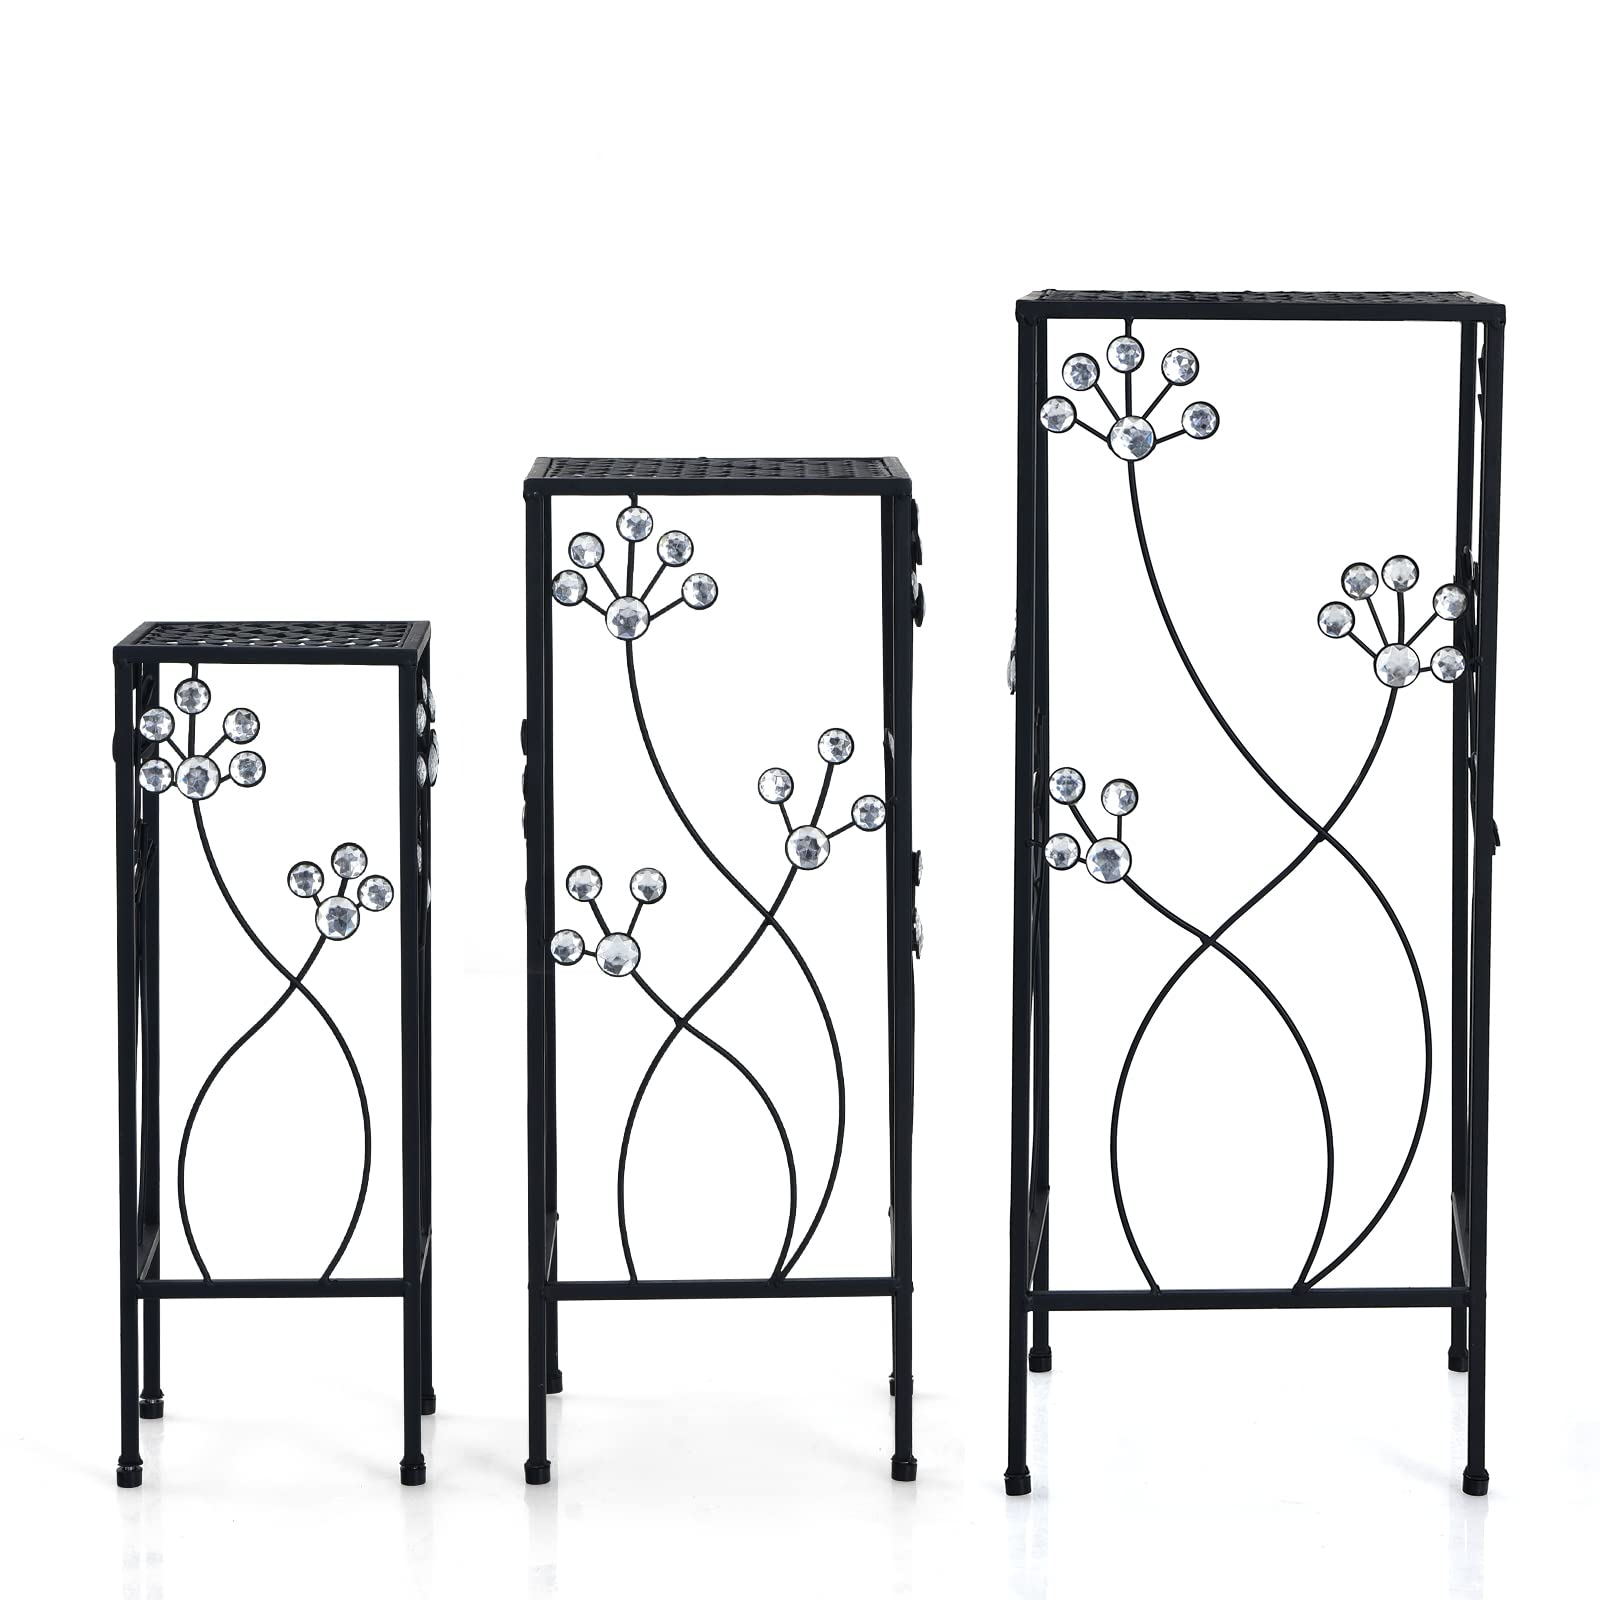 3 Pieces Flower Pots Display Rack with Vines and Crystal Floral Design